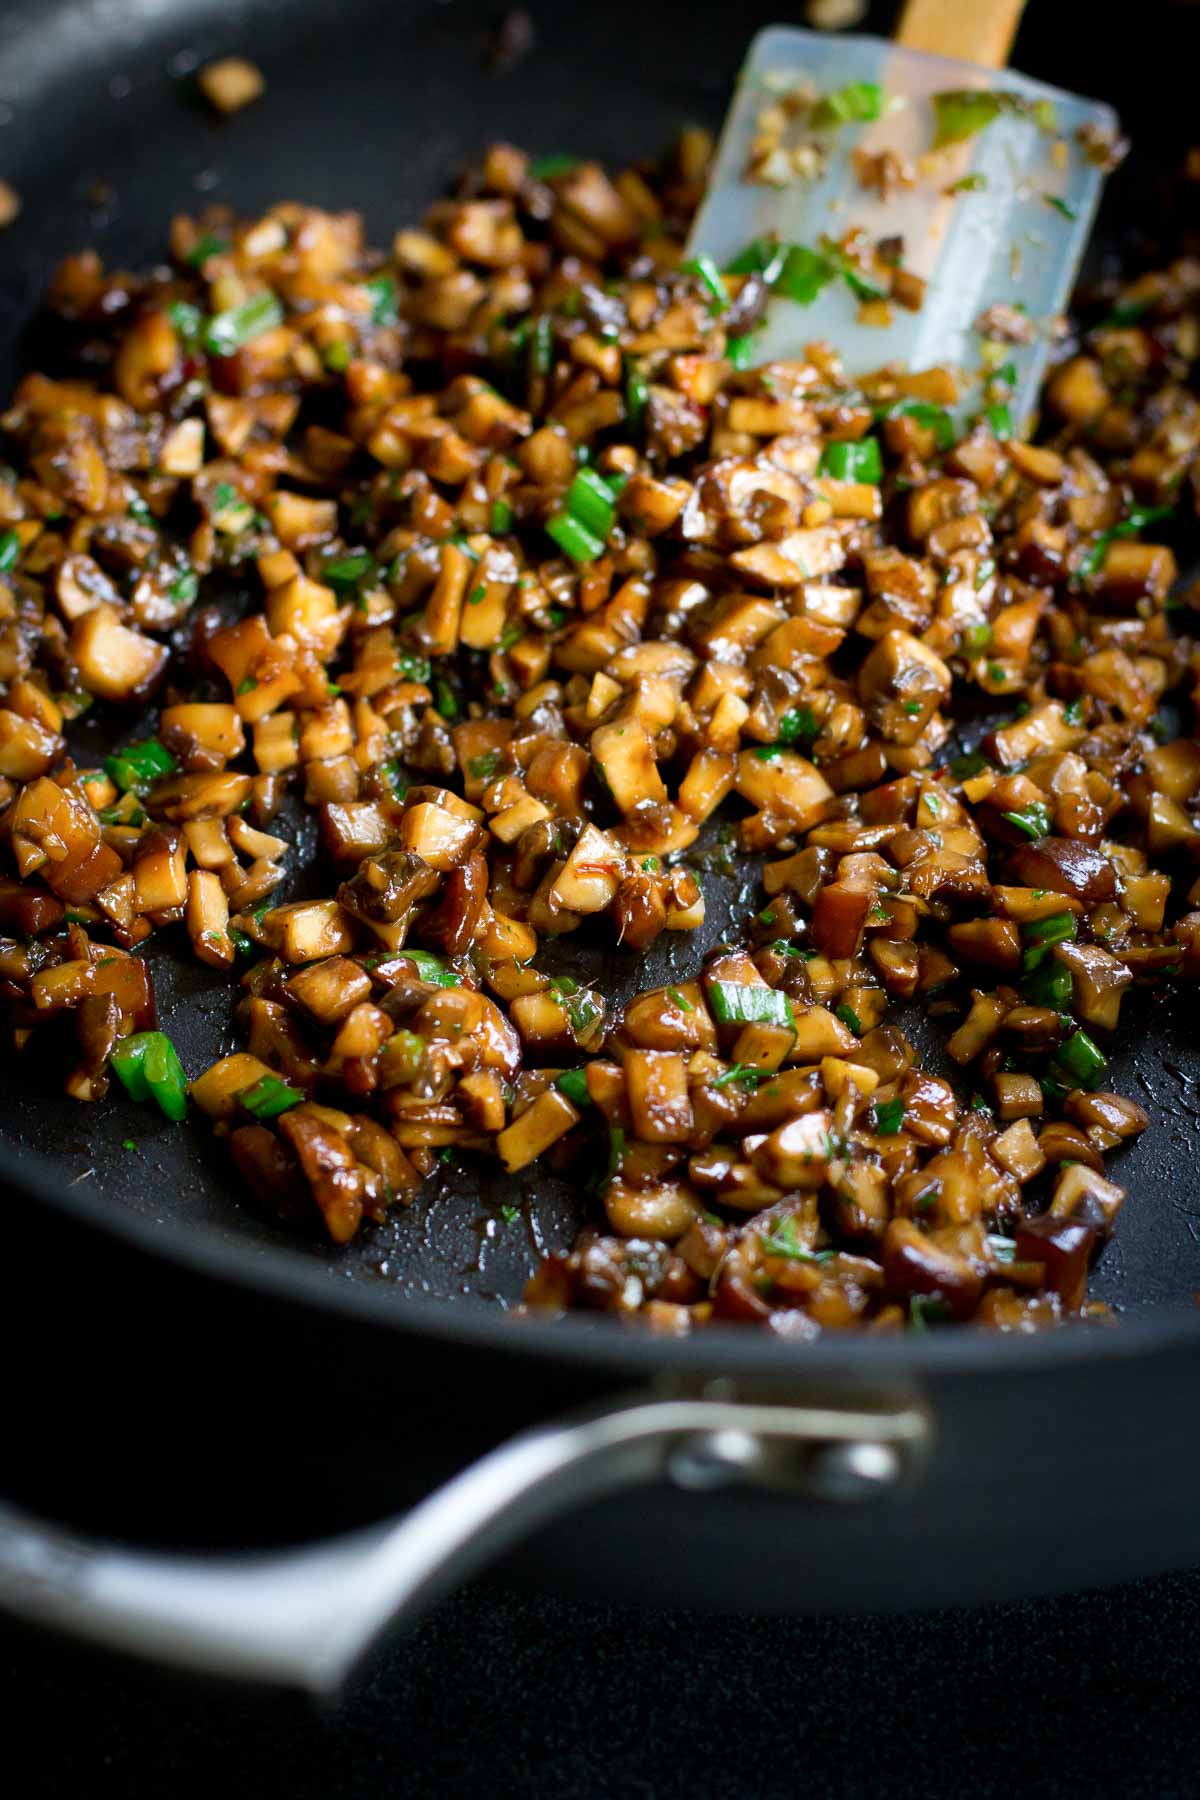 Cooked diced mushrooms with hoisin sauce and green onions in a large skillet.